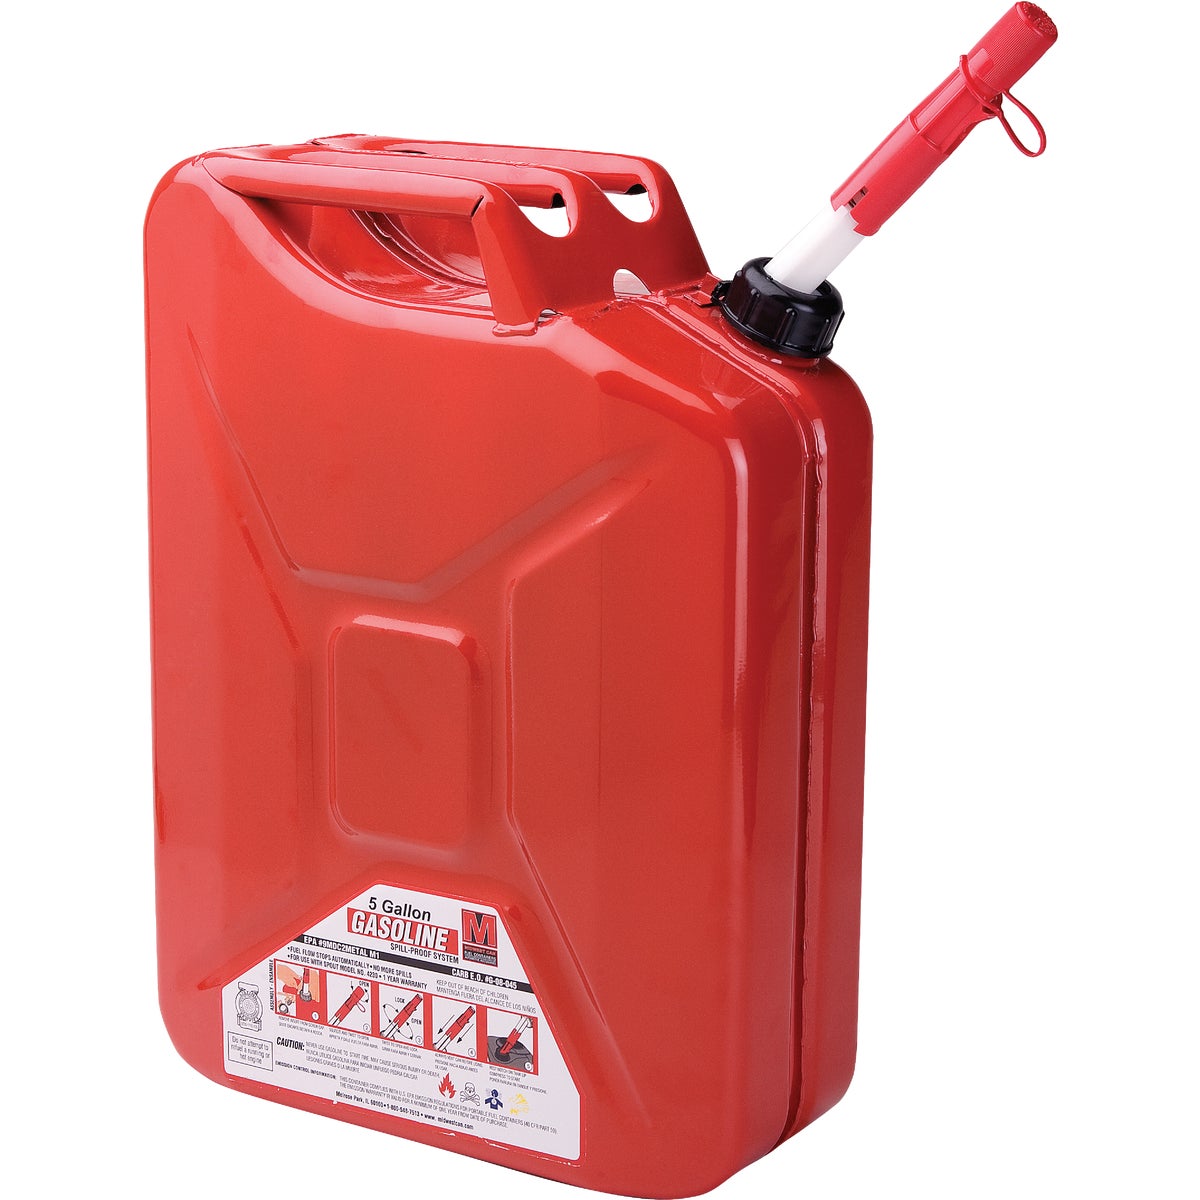 Item 595936, Metal "Jerry" gas can. Auto shut off can with flame mitigation device.